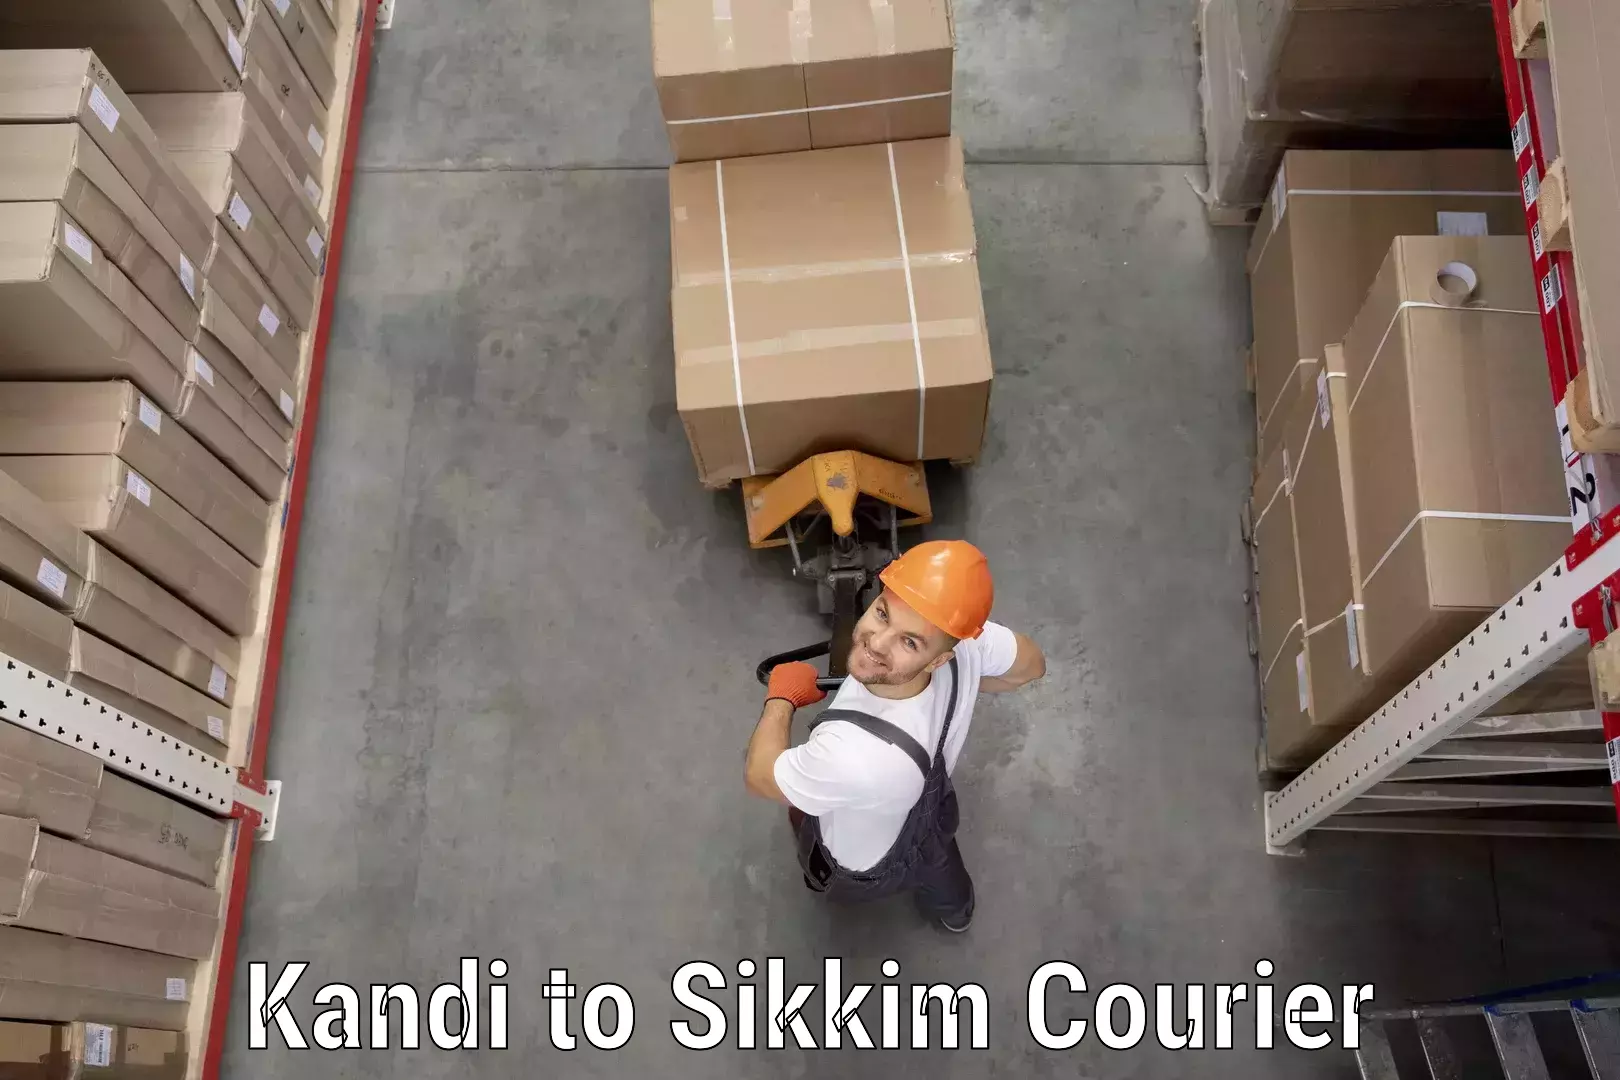 Flexible parcel services Kandi to Pelling